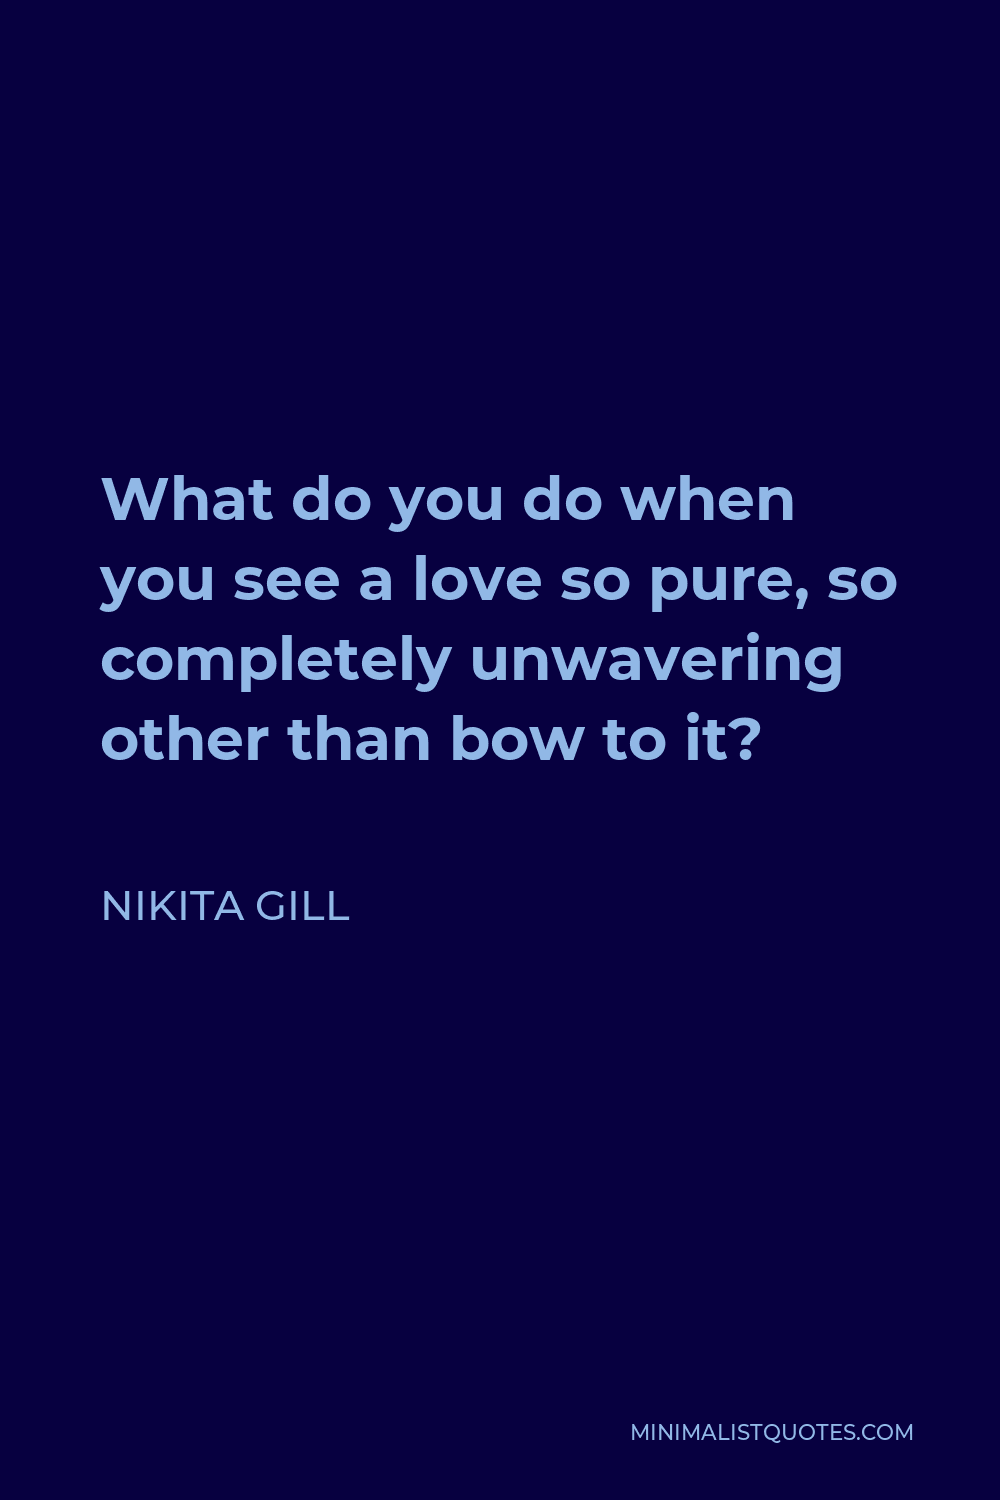 Nikita Gill Quote - What do you do when you see a love so pure, so completely unwavering other than bow to it?